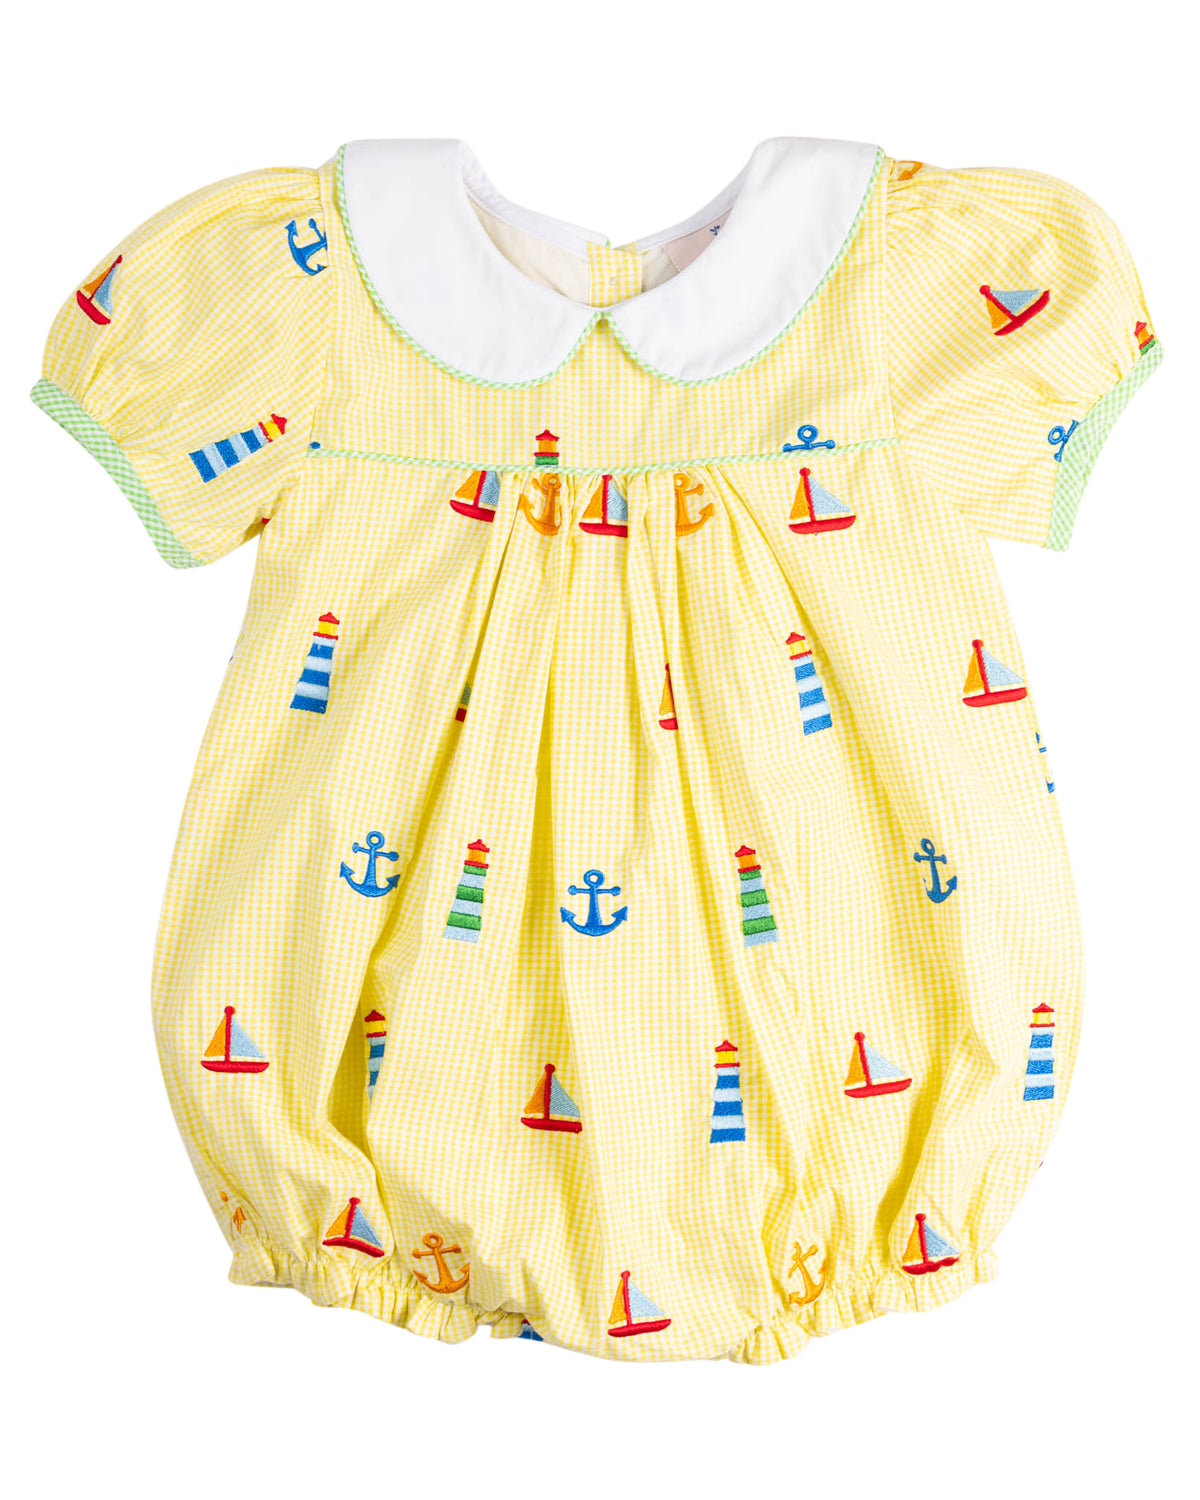 Nautical Embroidery Gingham Peter Pan Bubble